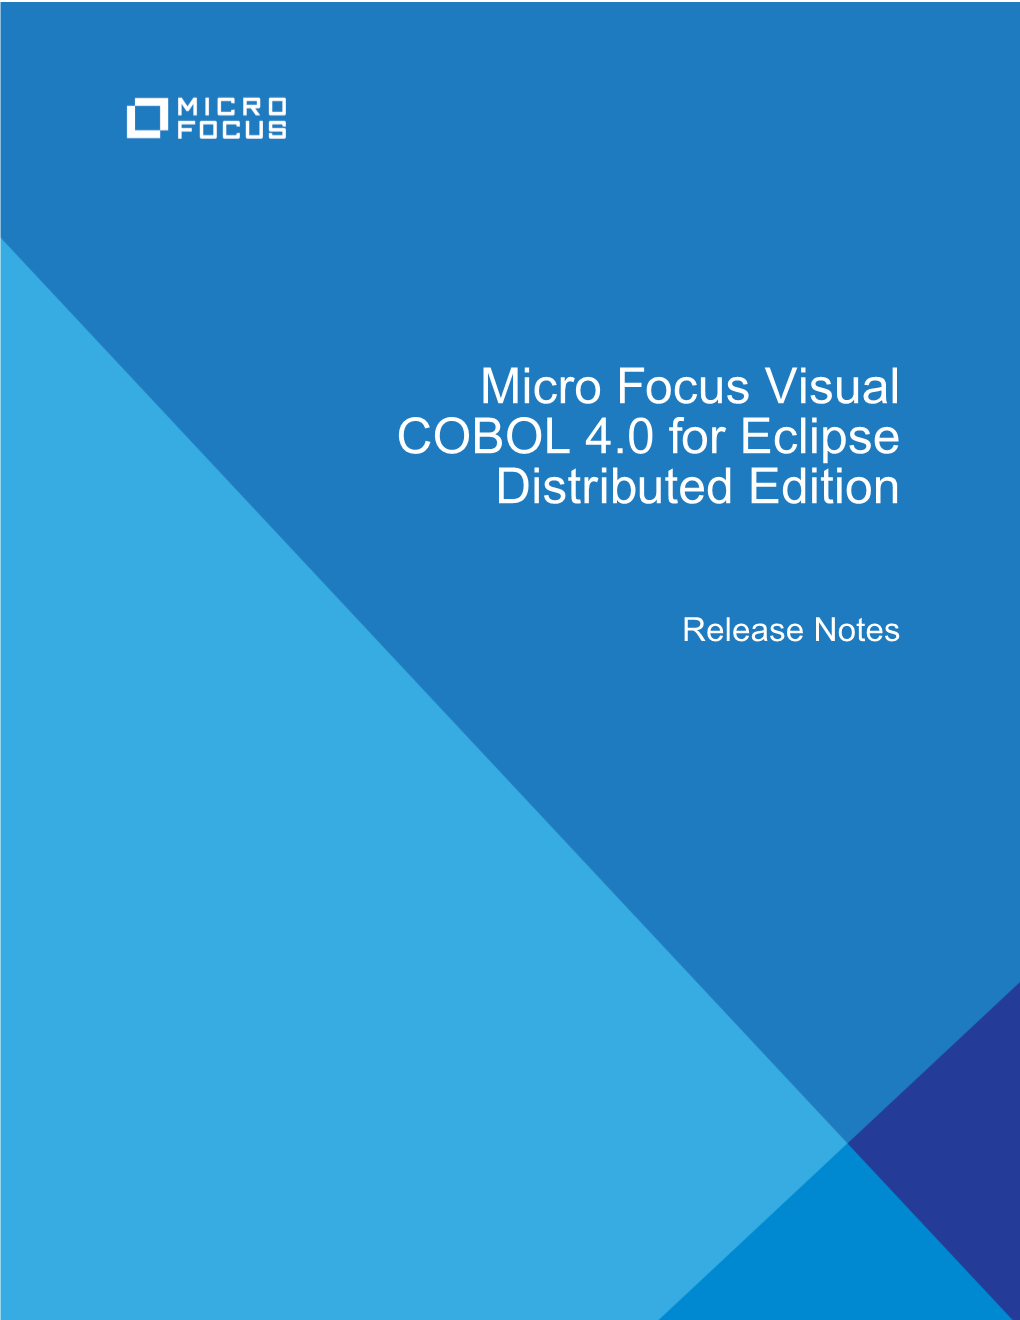 Micro Focus Visual COBOL 4.0 for Eclipse Distributed Edition